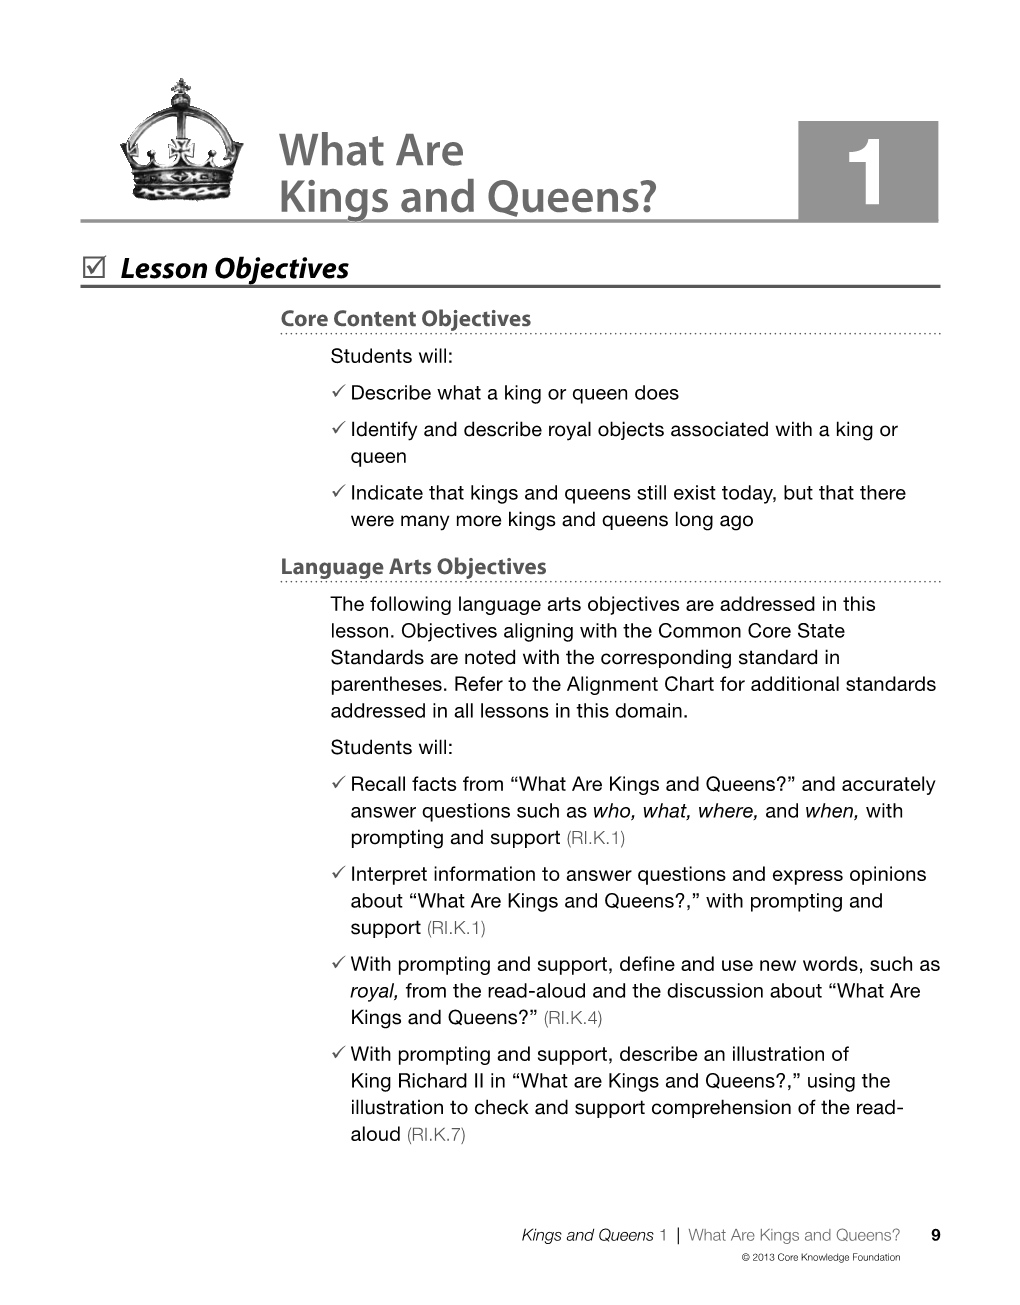 What Are Kings and Queens?